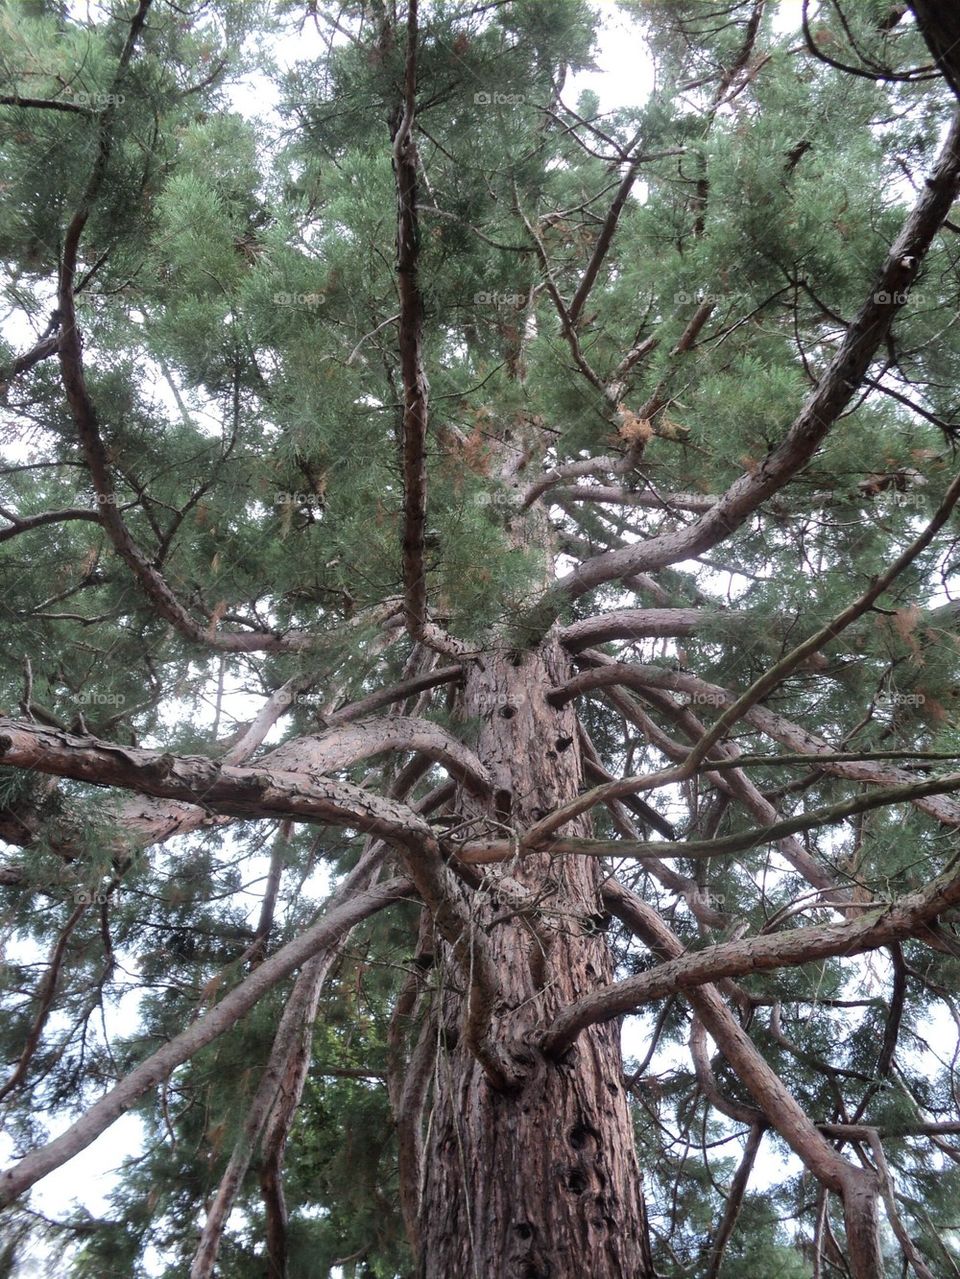 This is the only sequoia tree from Romania